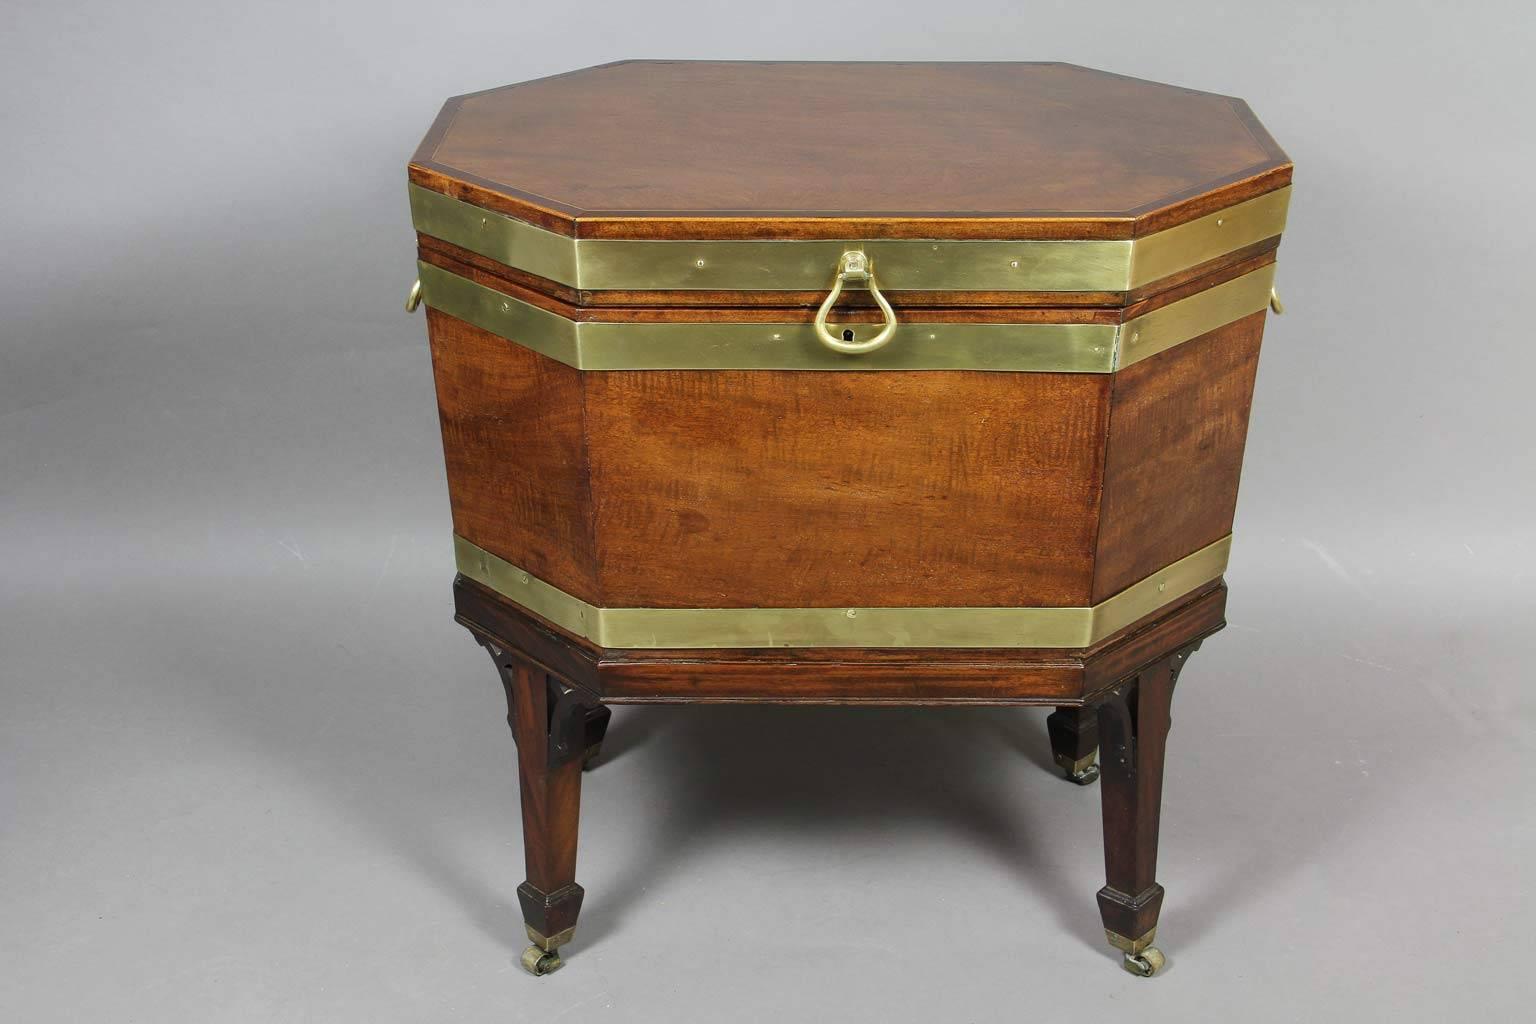 Elongated octagonal hinged lid opening to a fitted leaded interior with conforming case , the seperate base with square tapered legs with pierced spandrels , block feet and casters